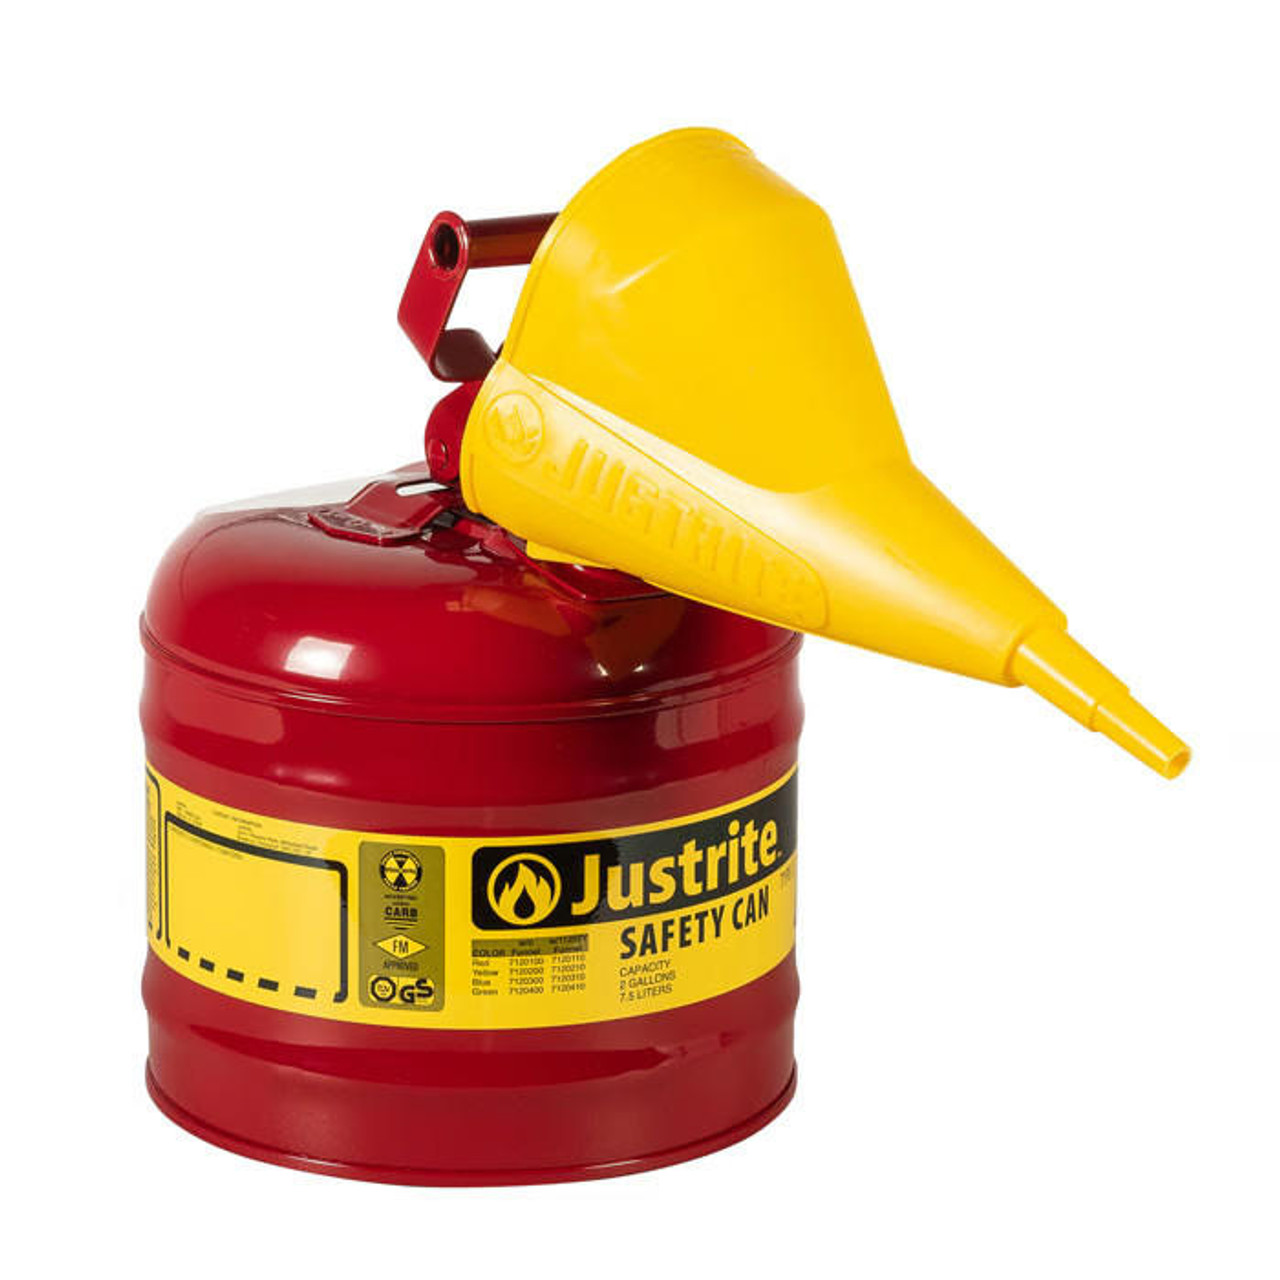 JUSTRITE 2 GAL TYPE I SAFETY CAN FUNNEL - Lysol Disinfectant Spray